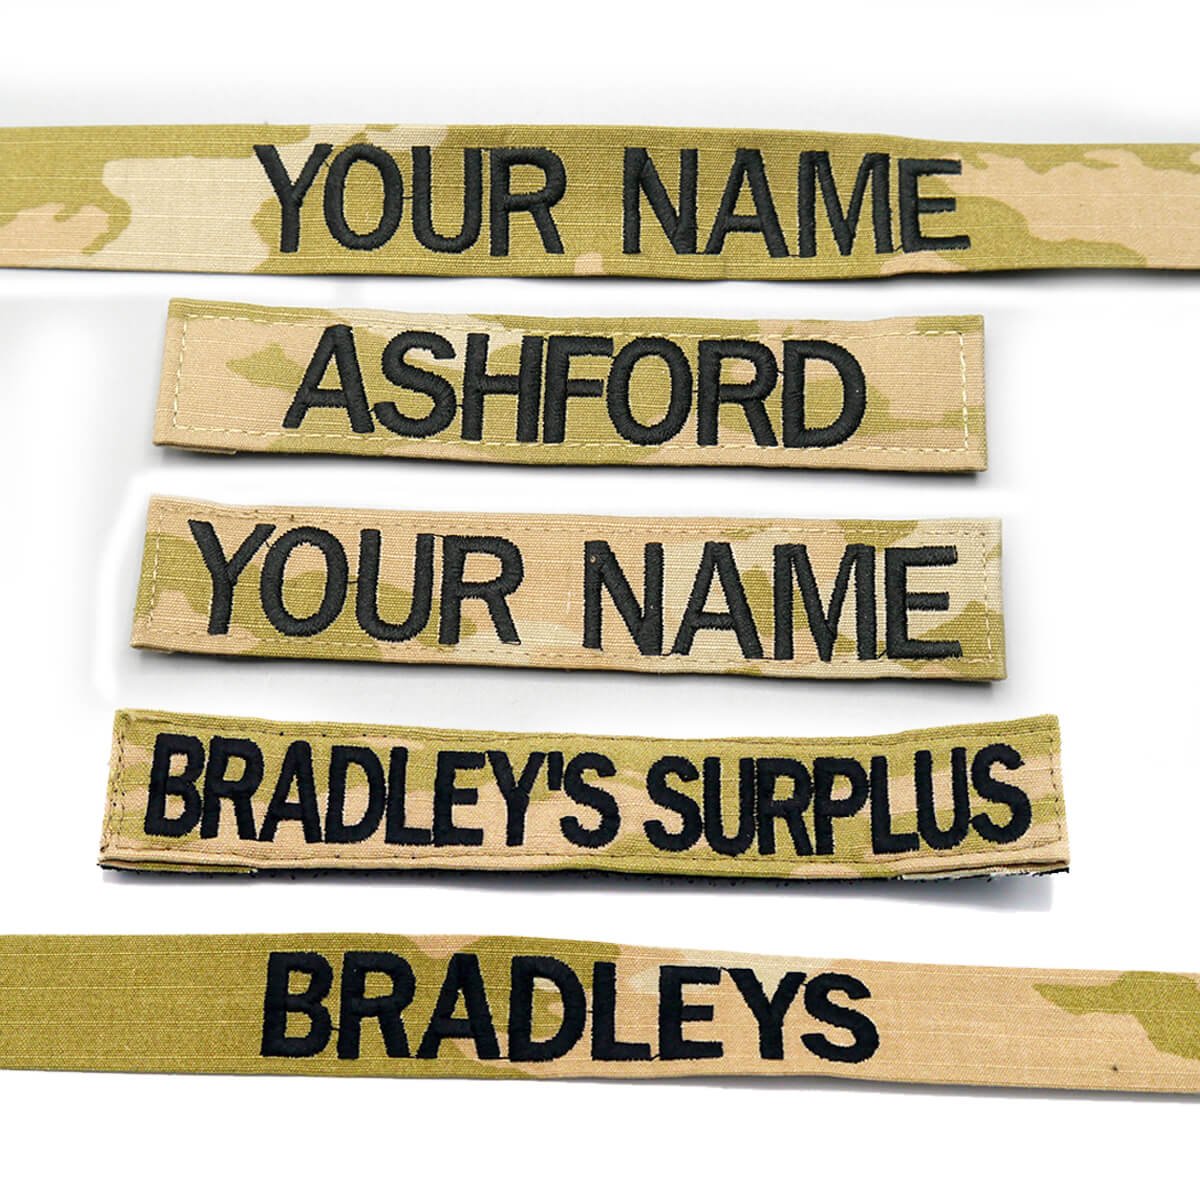 Buy ACU Name Tapes at Army Surplus World